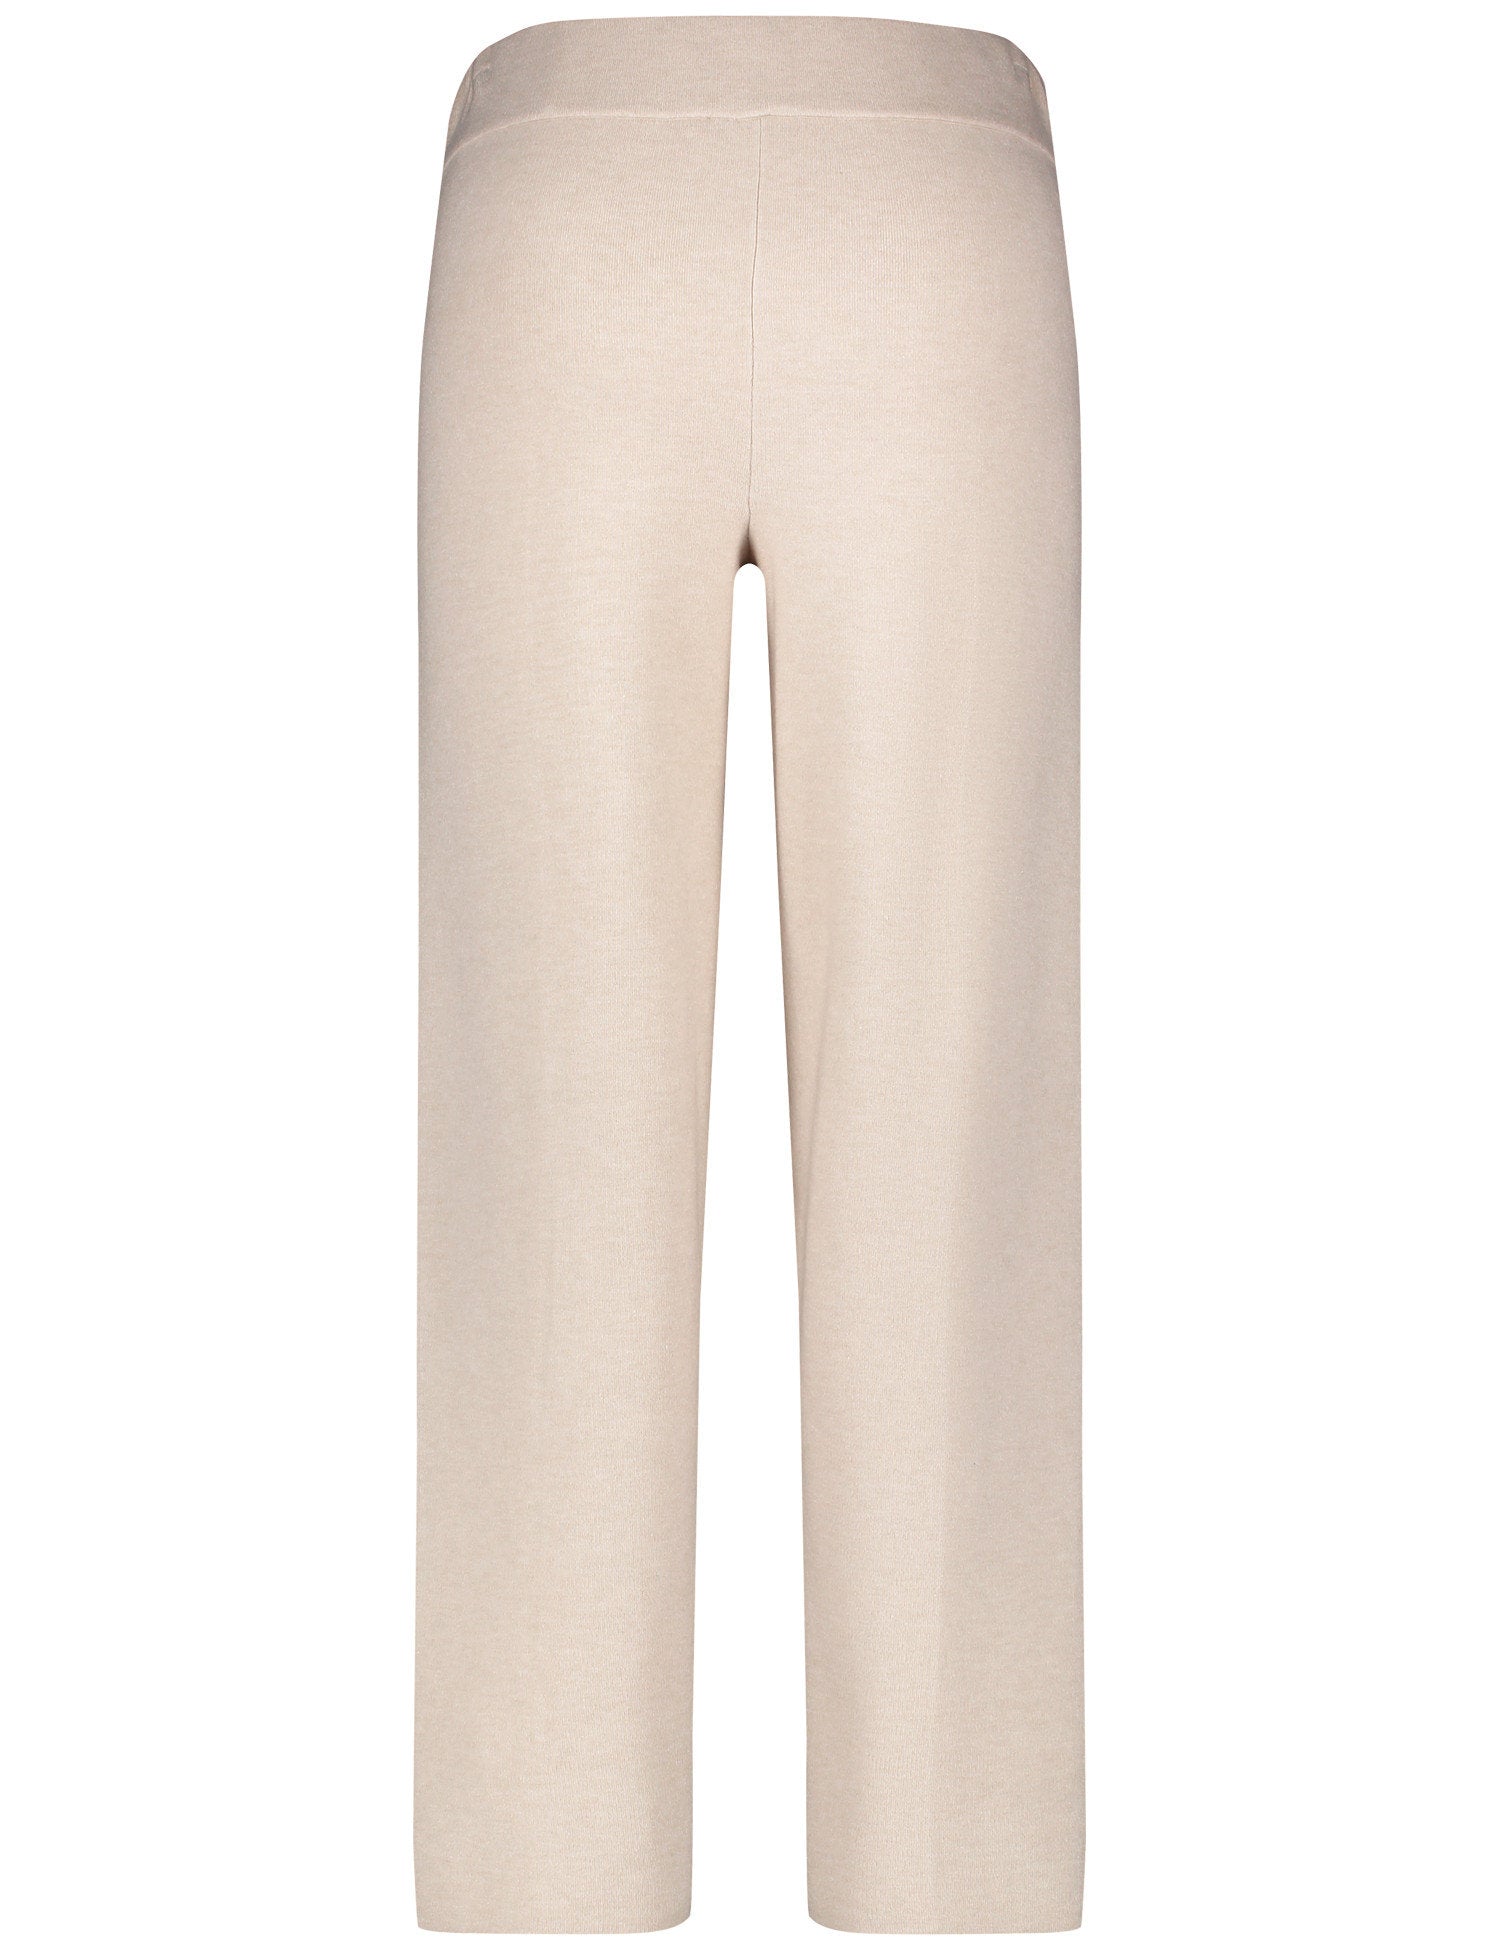 Beige Dress Trousers With Center Pleat_220032-35708_905440_02